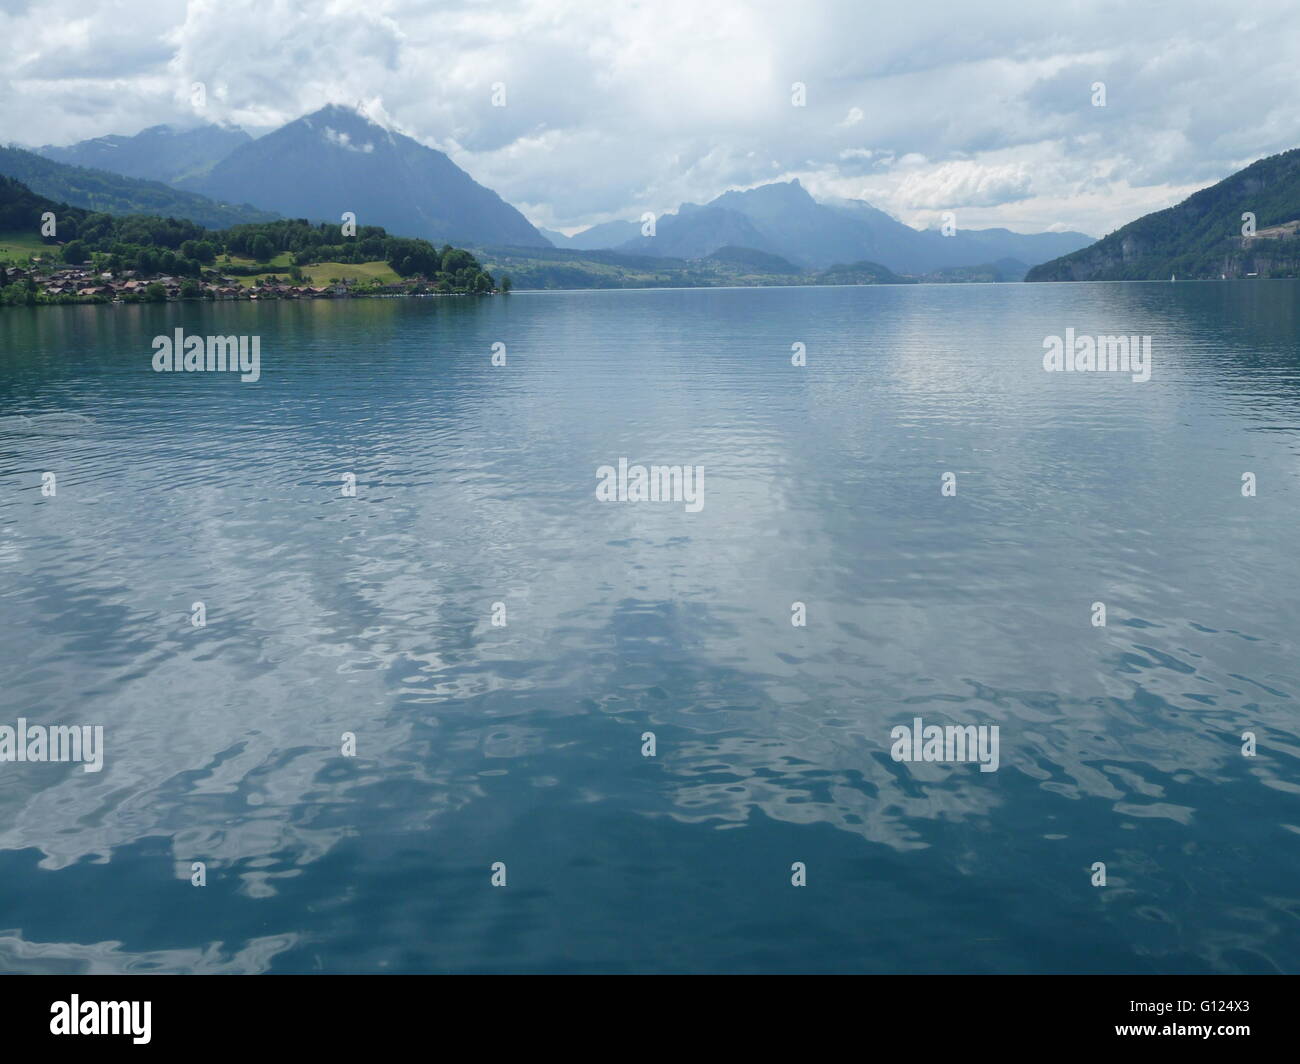 Thunersee lake, Switzerland on a calm summer's day with Niesen mountain in the distance Stock Photo